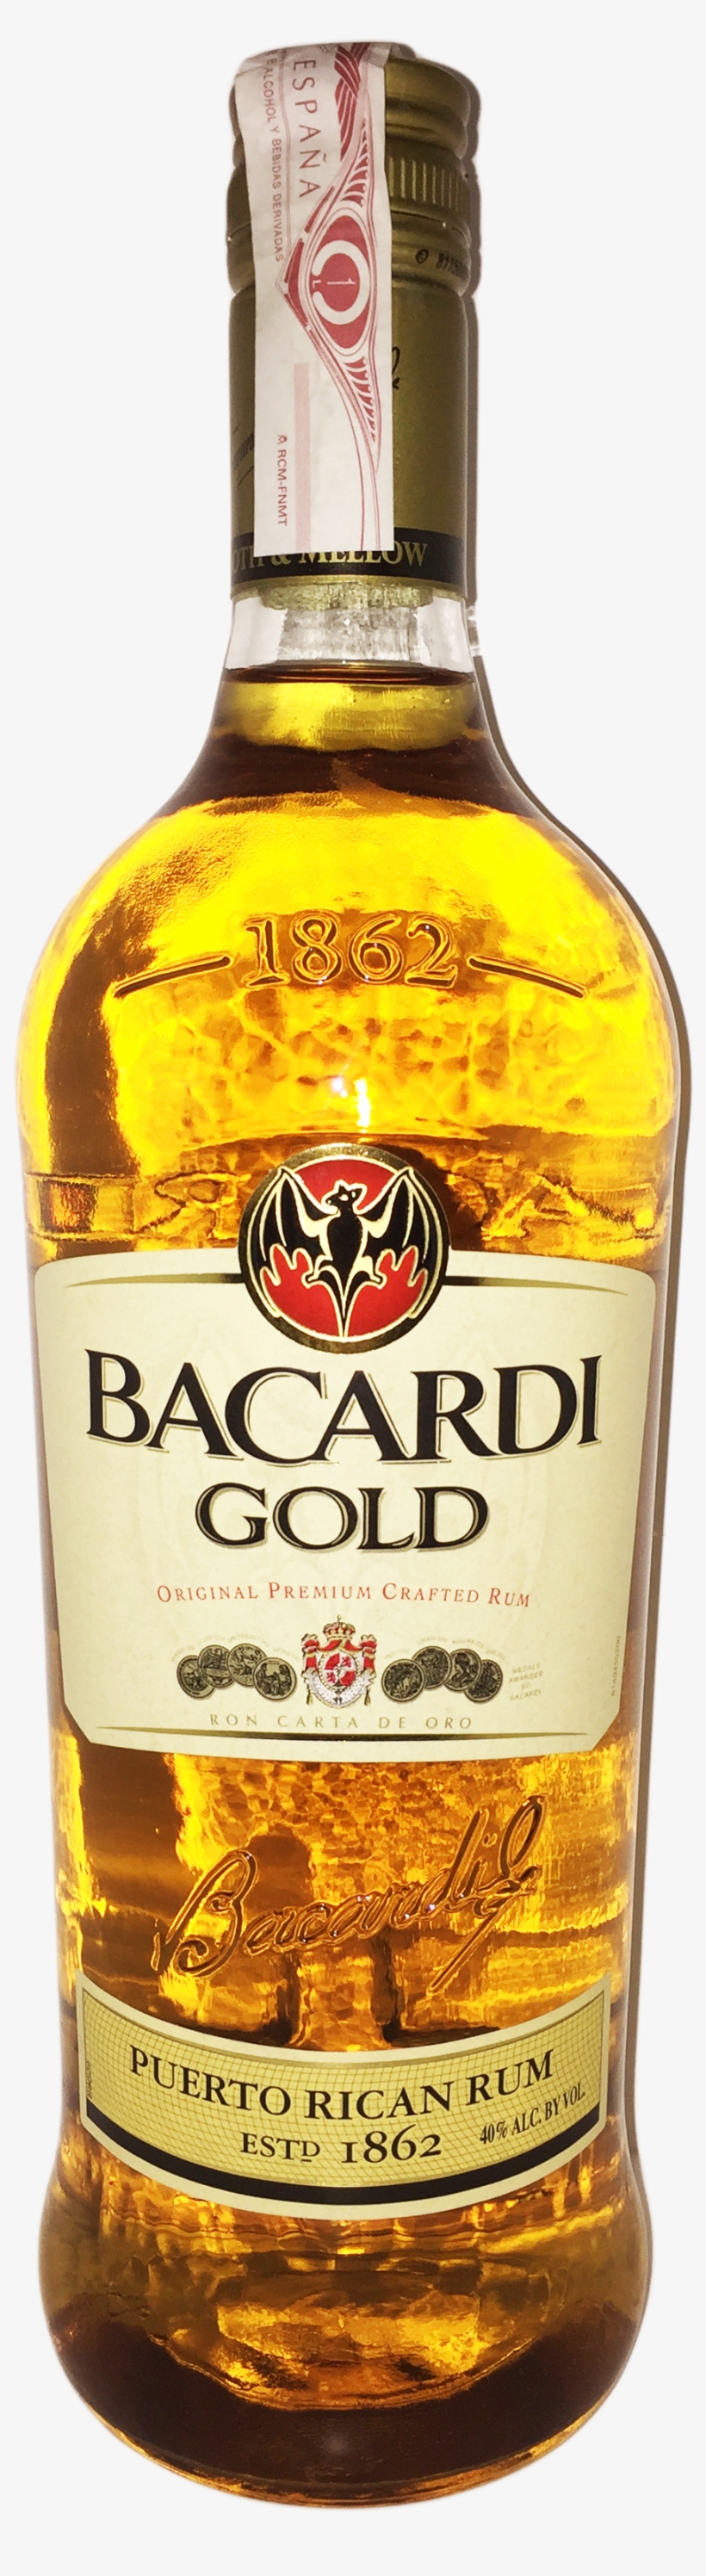 Picture Alcohol Vector Bottle Bacardi - Bacardi Gold Rum 750ml, transparent png #4881658